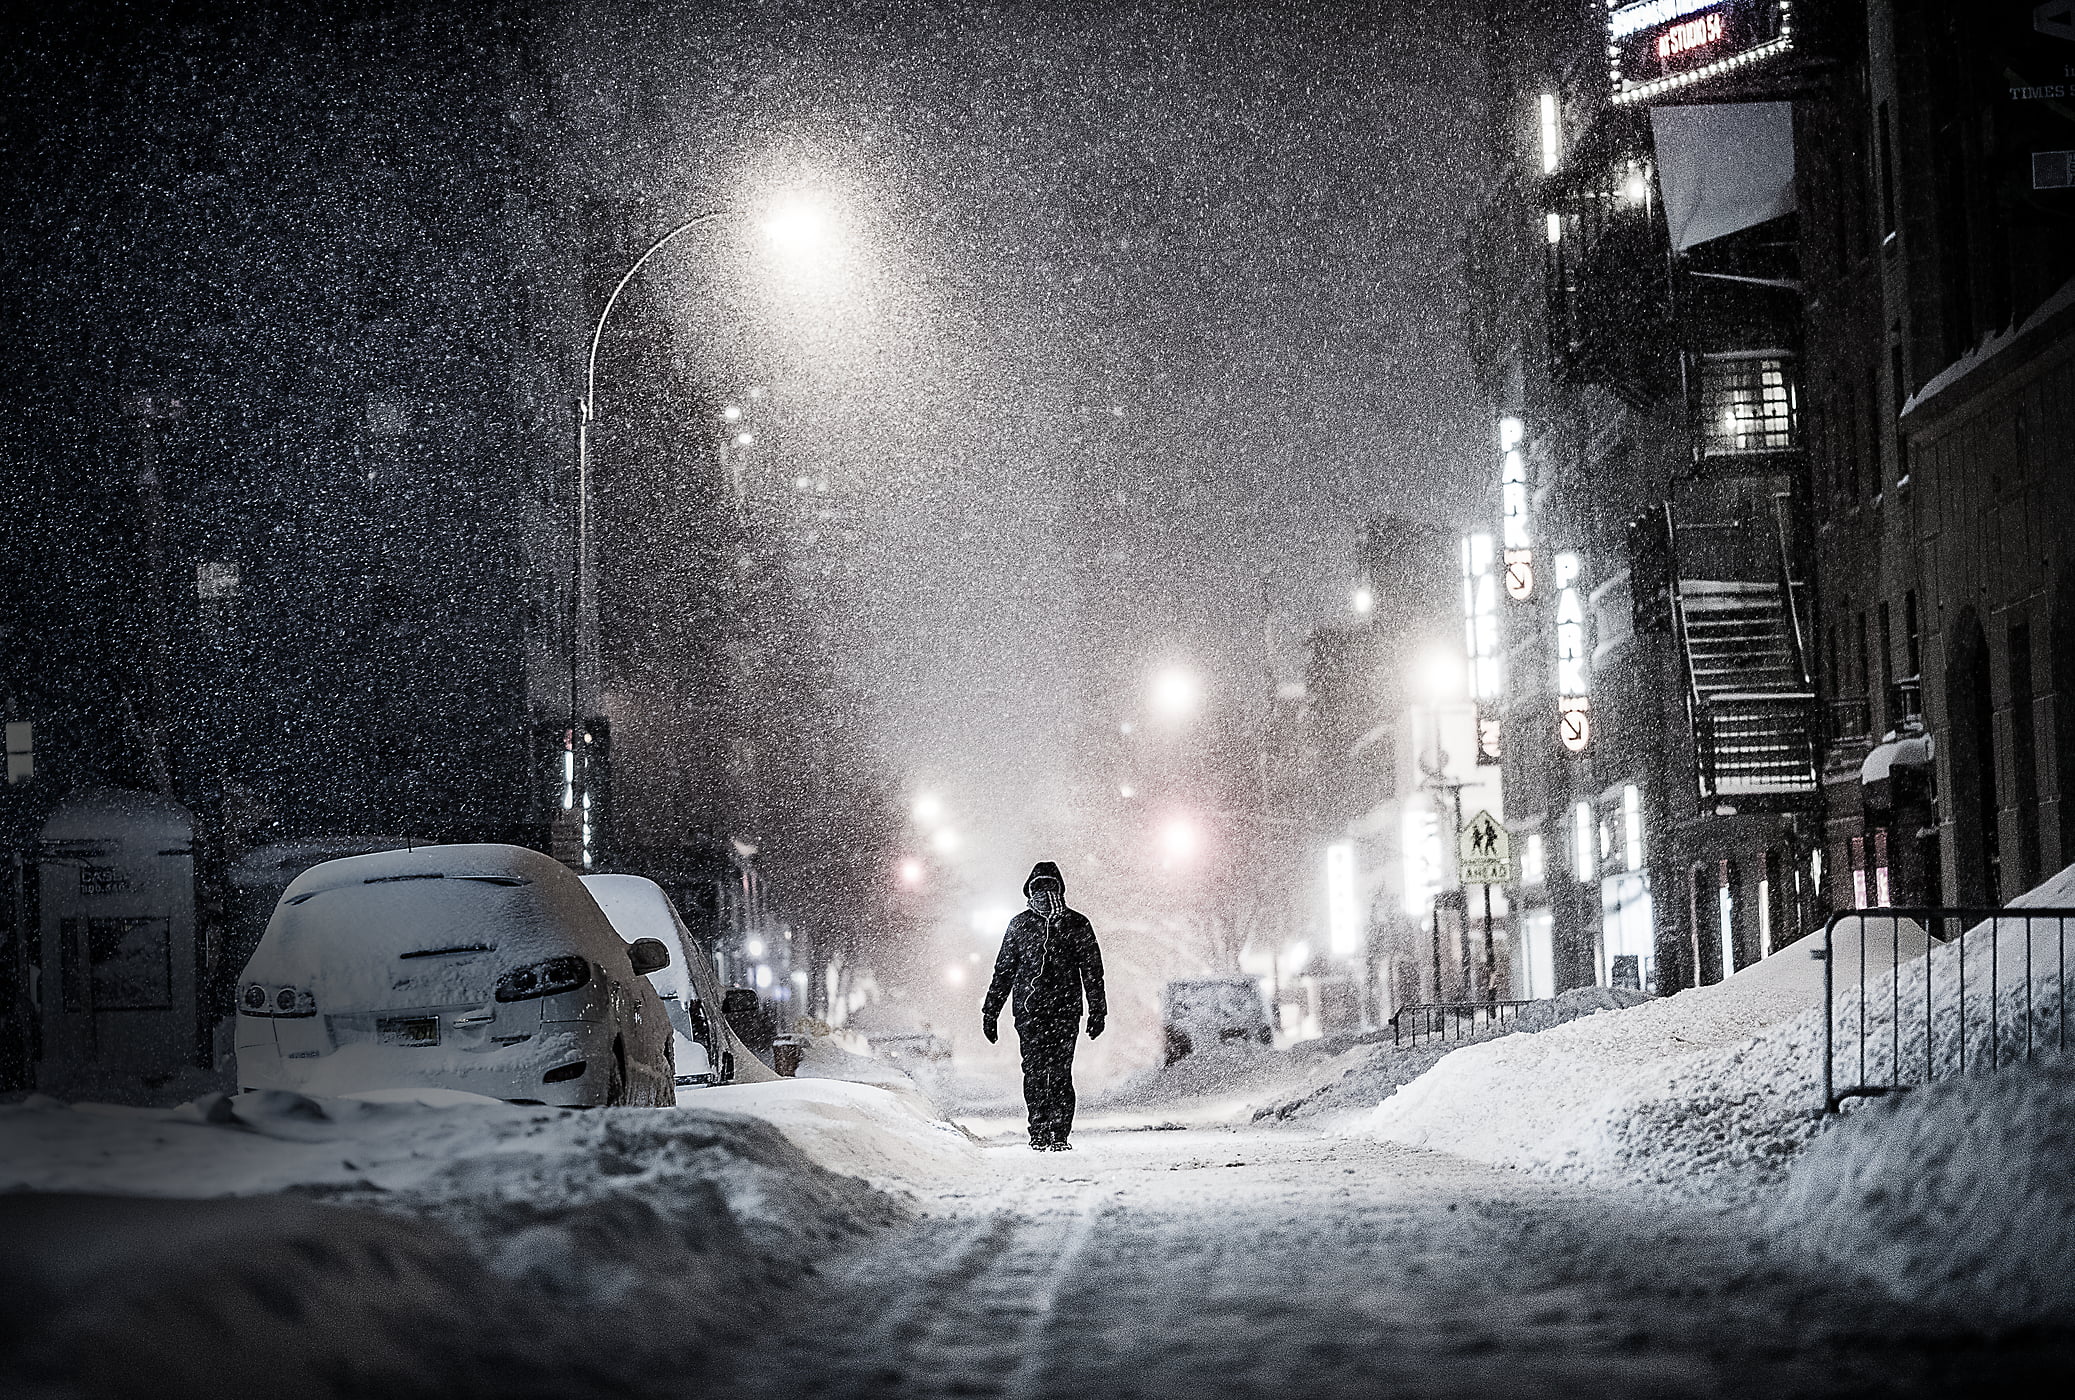 50 megapixels! A very high resolution VAST photo of a lonely person walking down an alley during the 2016 winter snow blizzard at night in New York City; created by Dan Piech